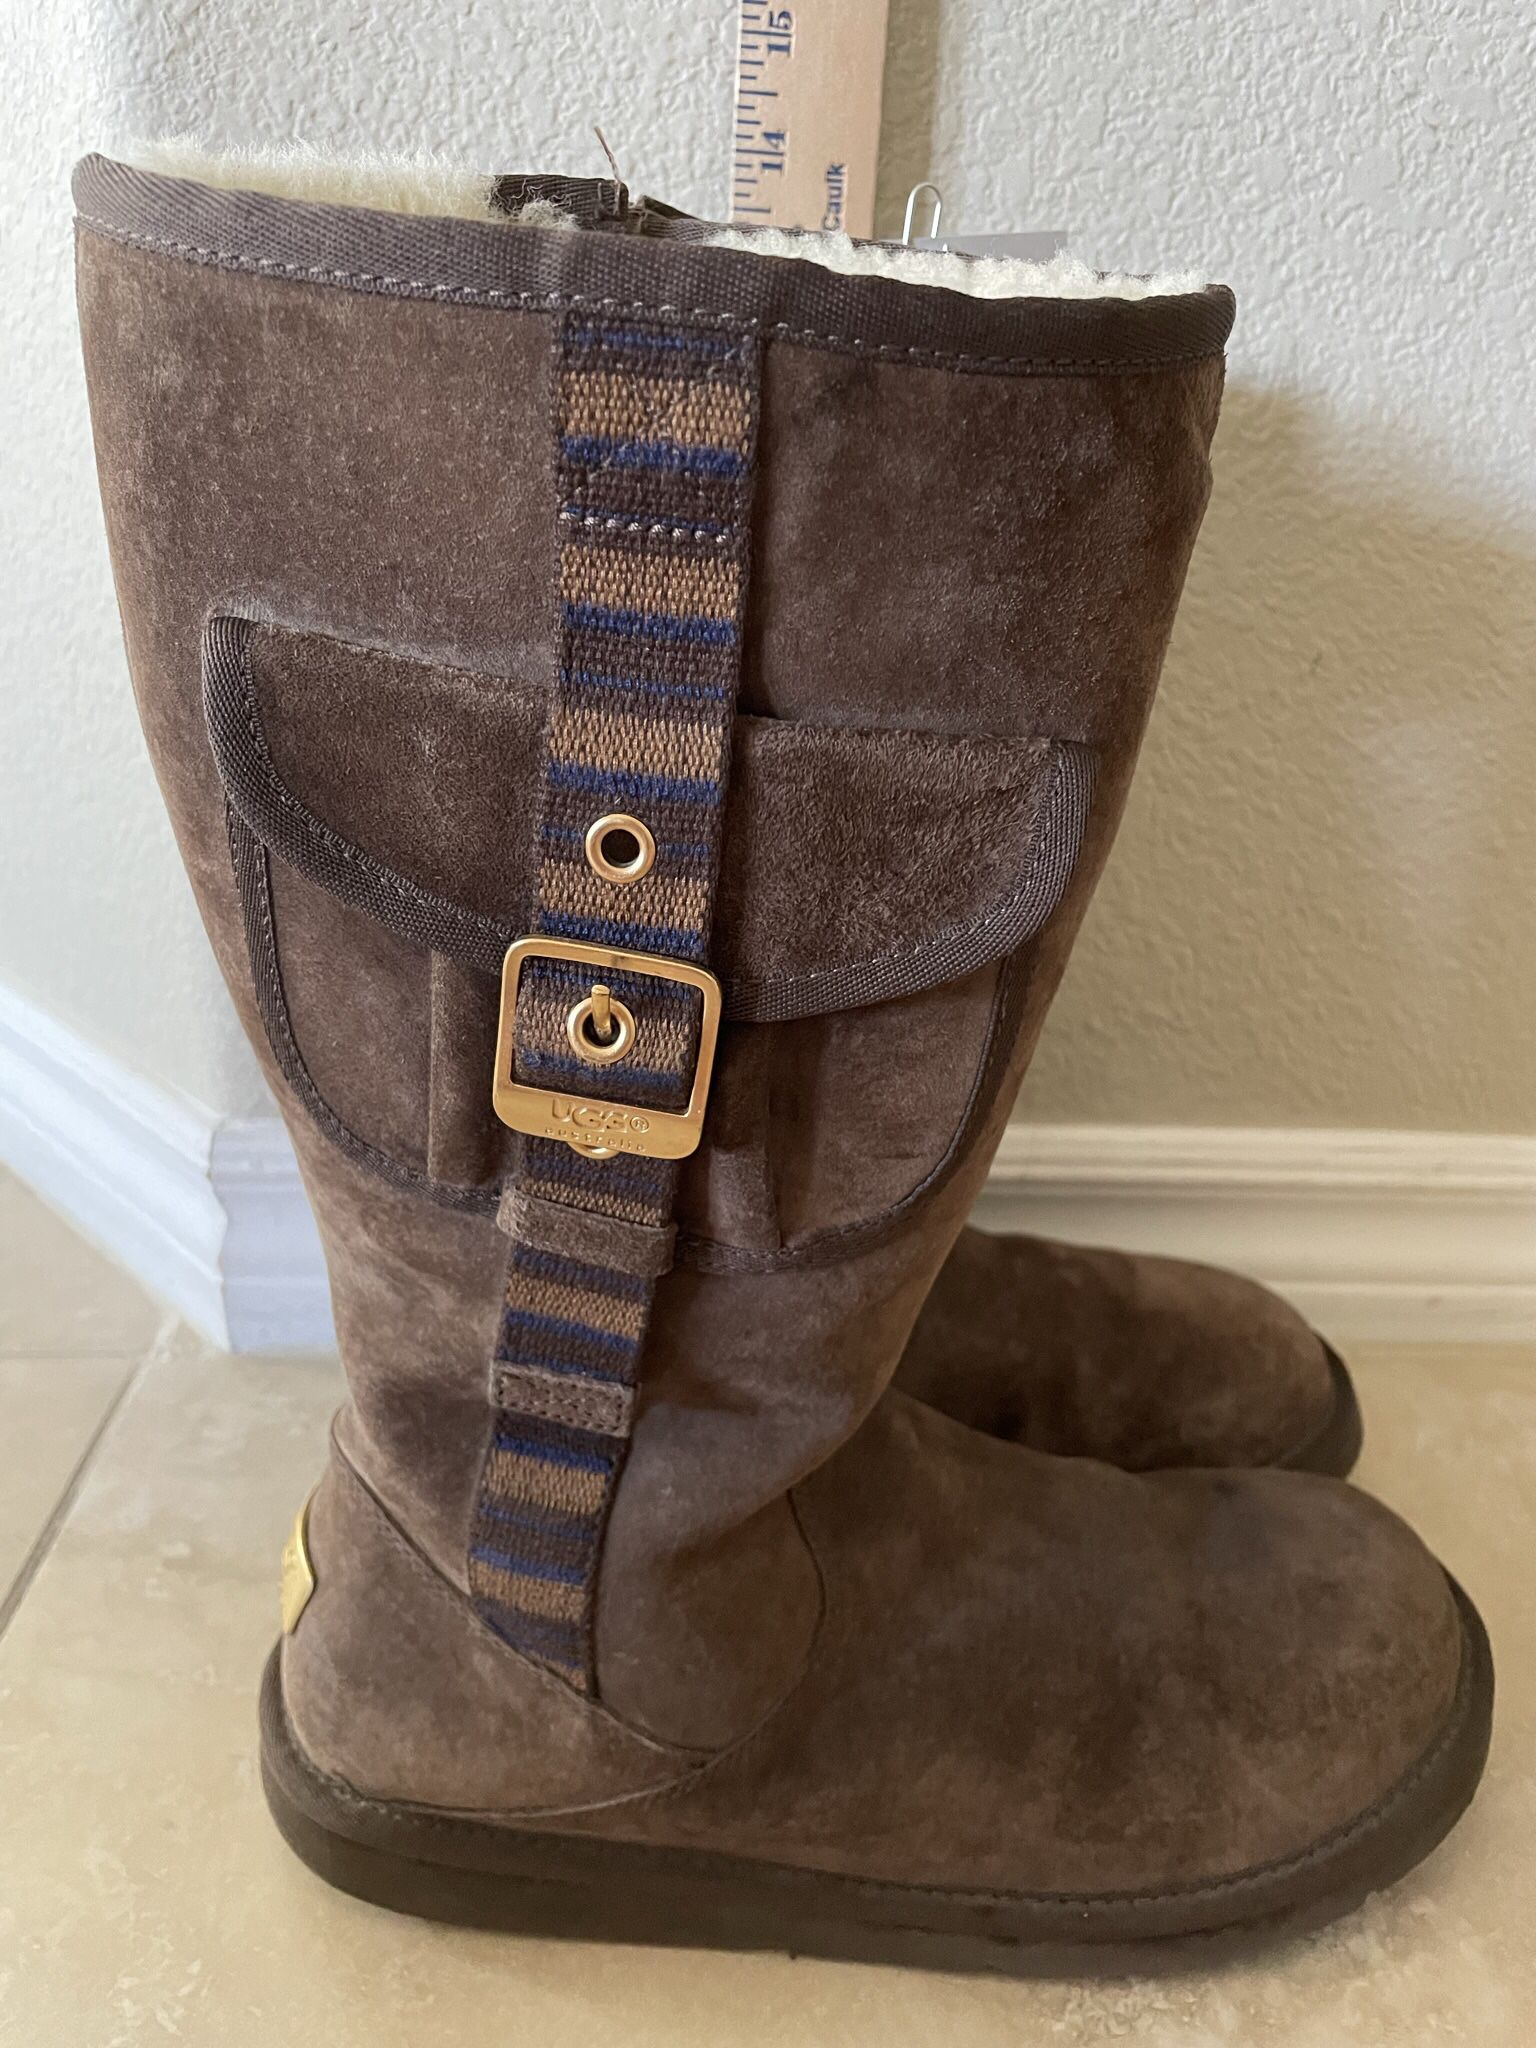 Custom-made Louis Vuitton Ugg Boots for Sale in Las Vegas, NV - OfferUp